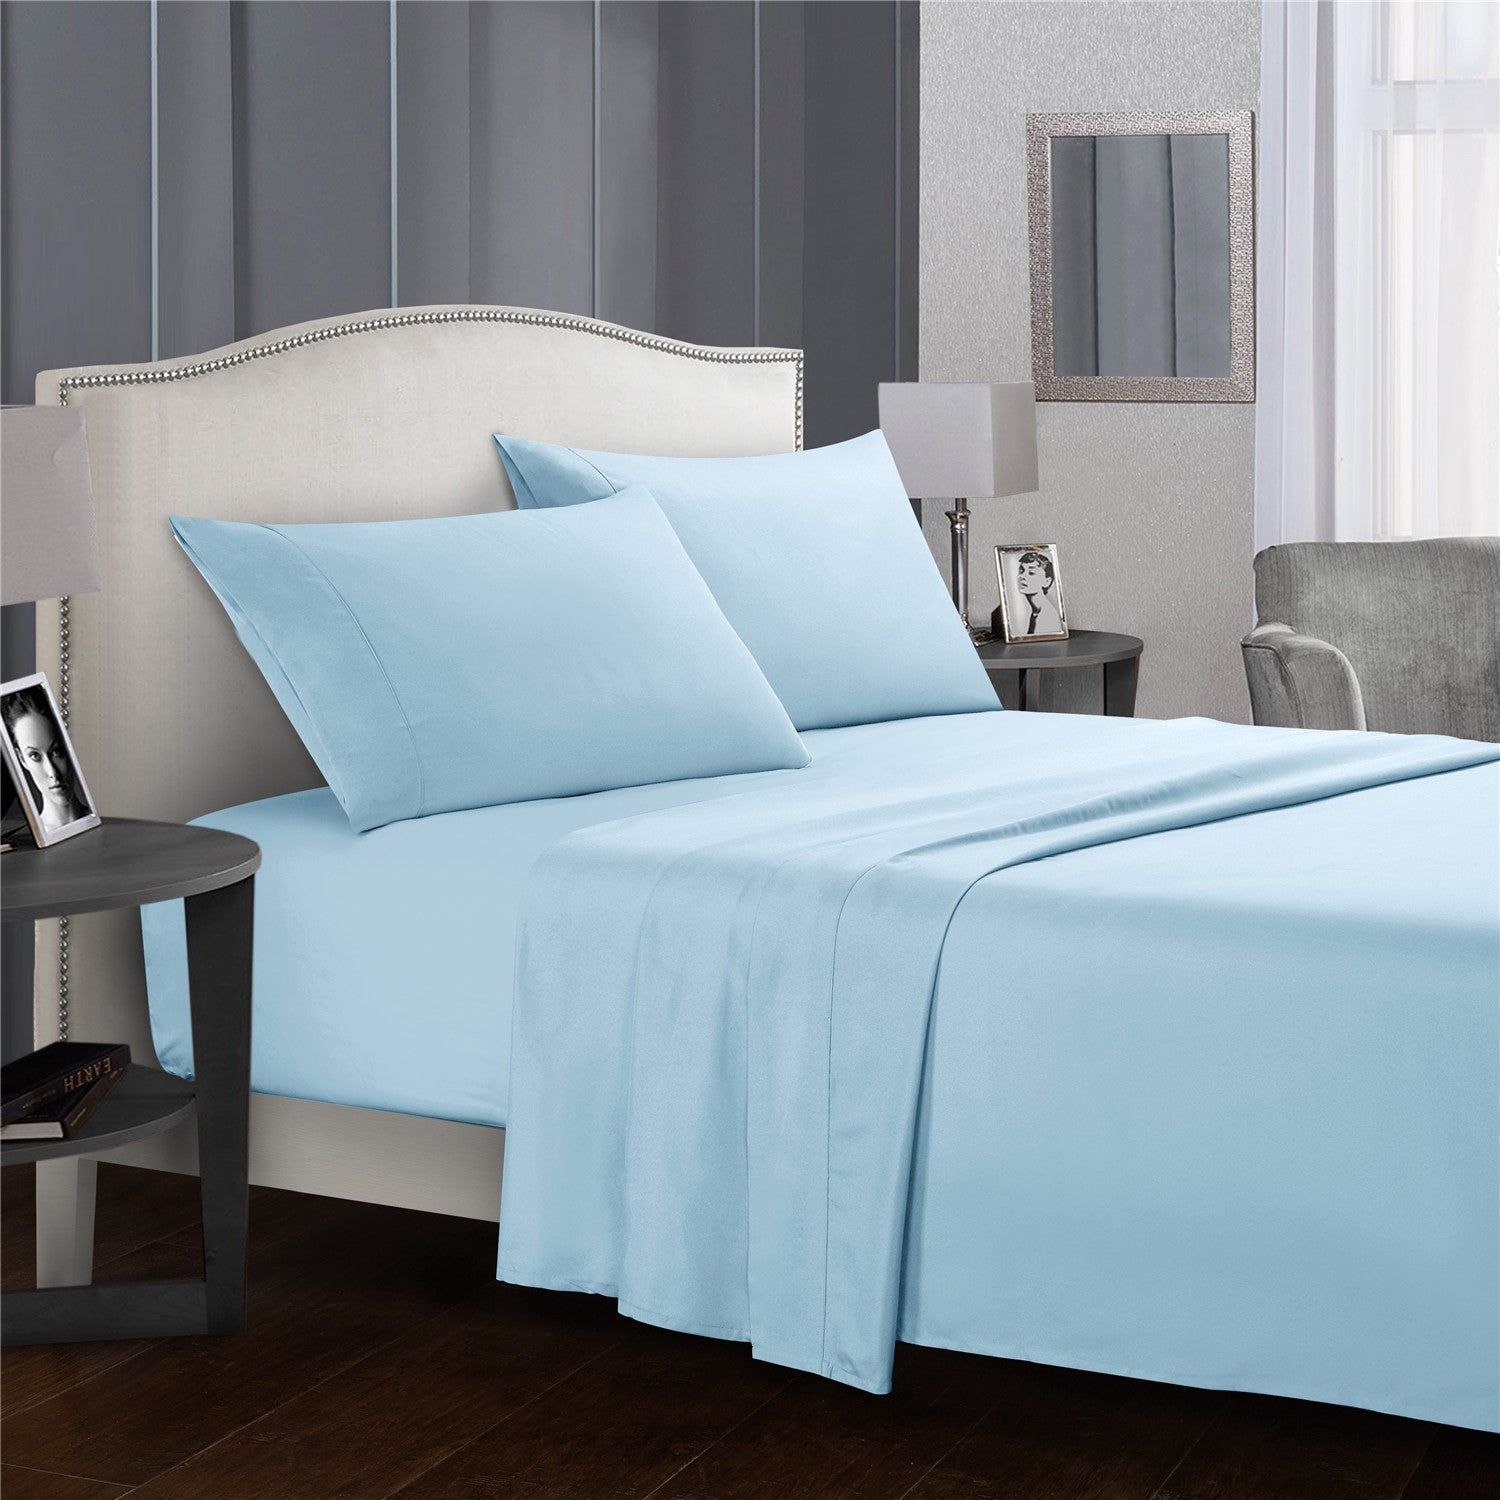 Self-Cleaning And Self-Cooling Bed Sheets